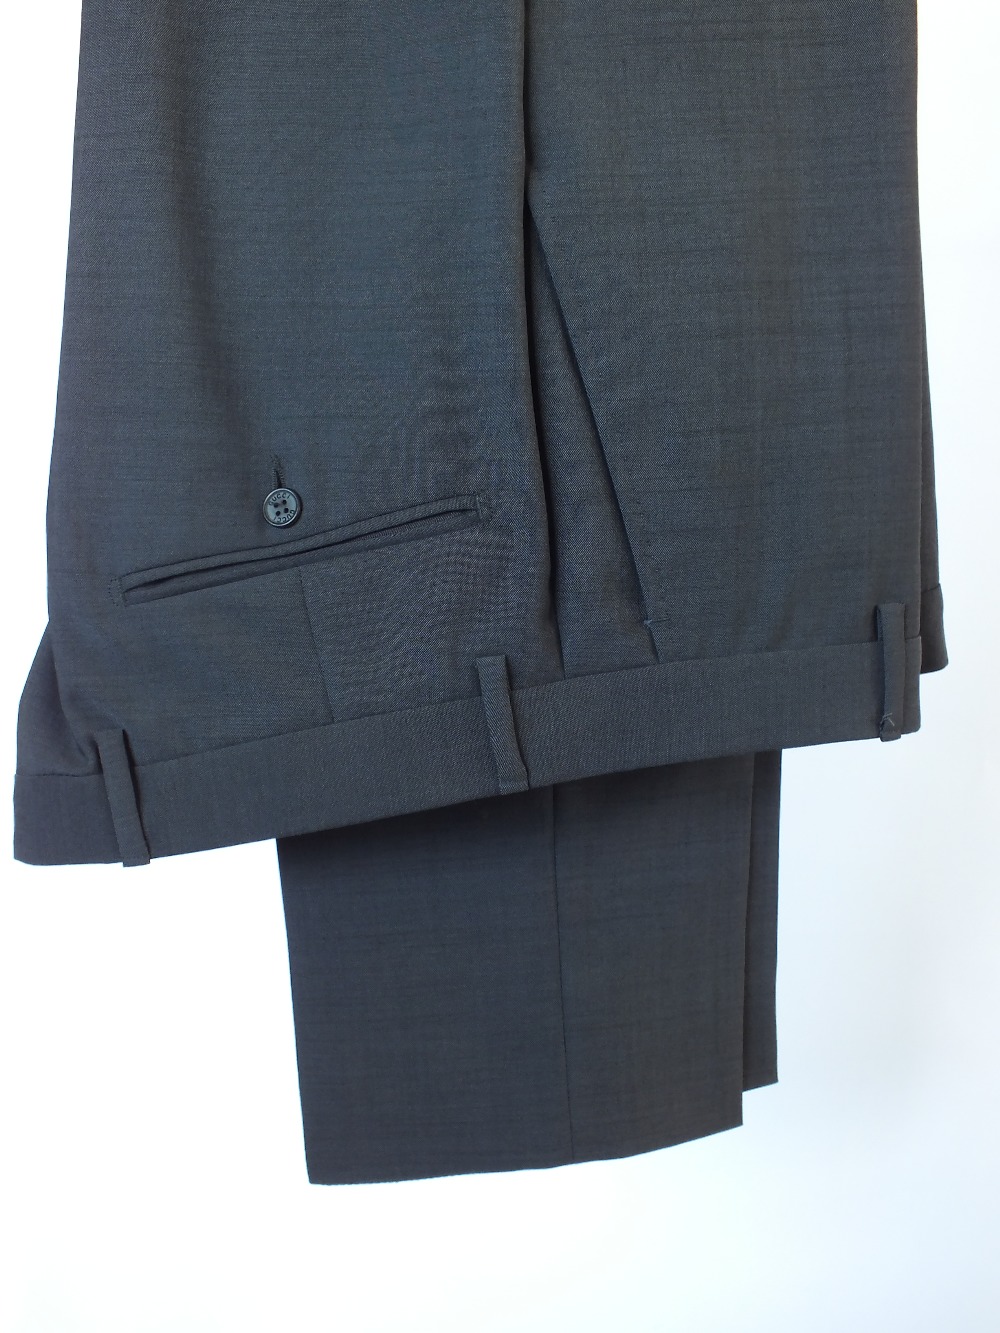 A Gucci suit, grey, double vent, Italian size 50R, 75% wool, 25% mohair, damage to left shoulder, - Image 9 of 9